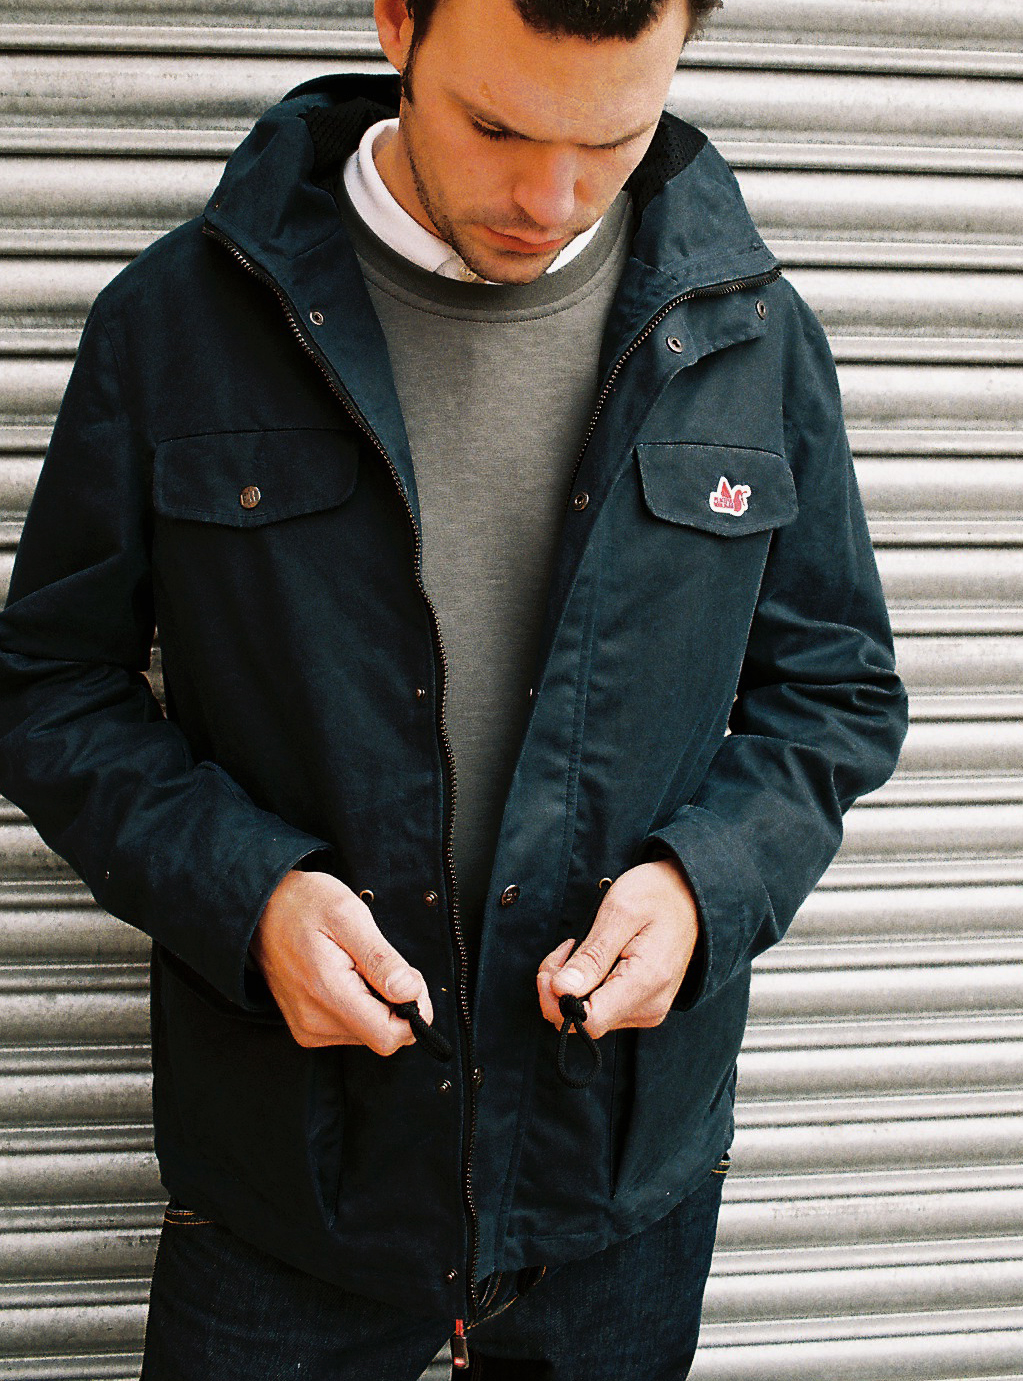 We Are Peaceful Hooligans: Hook Jacket - Constructed in Great Britain